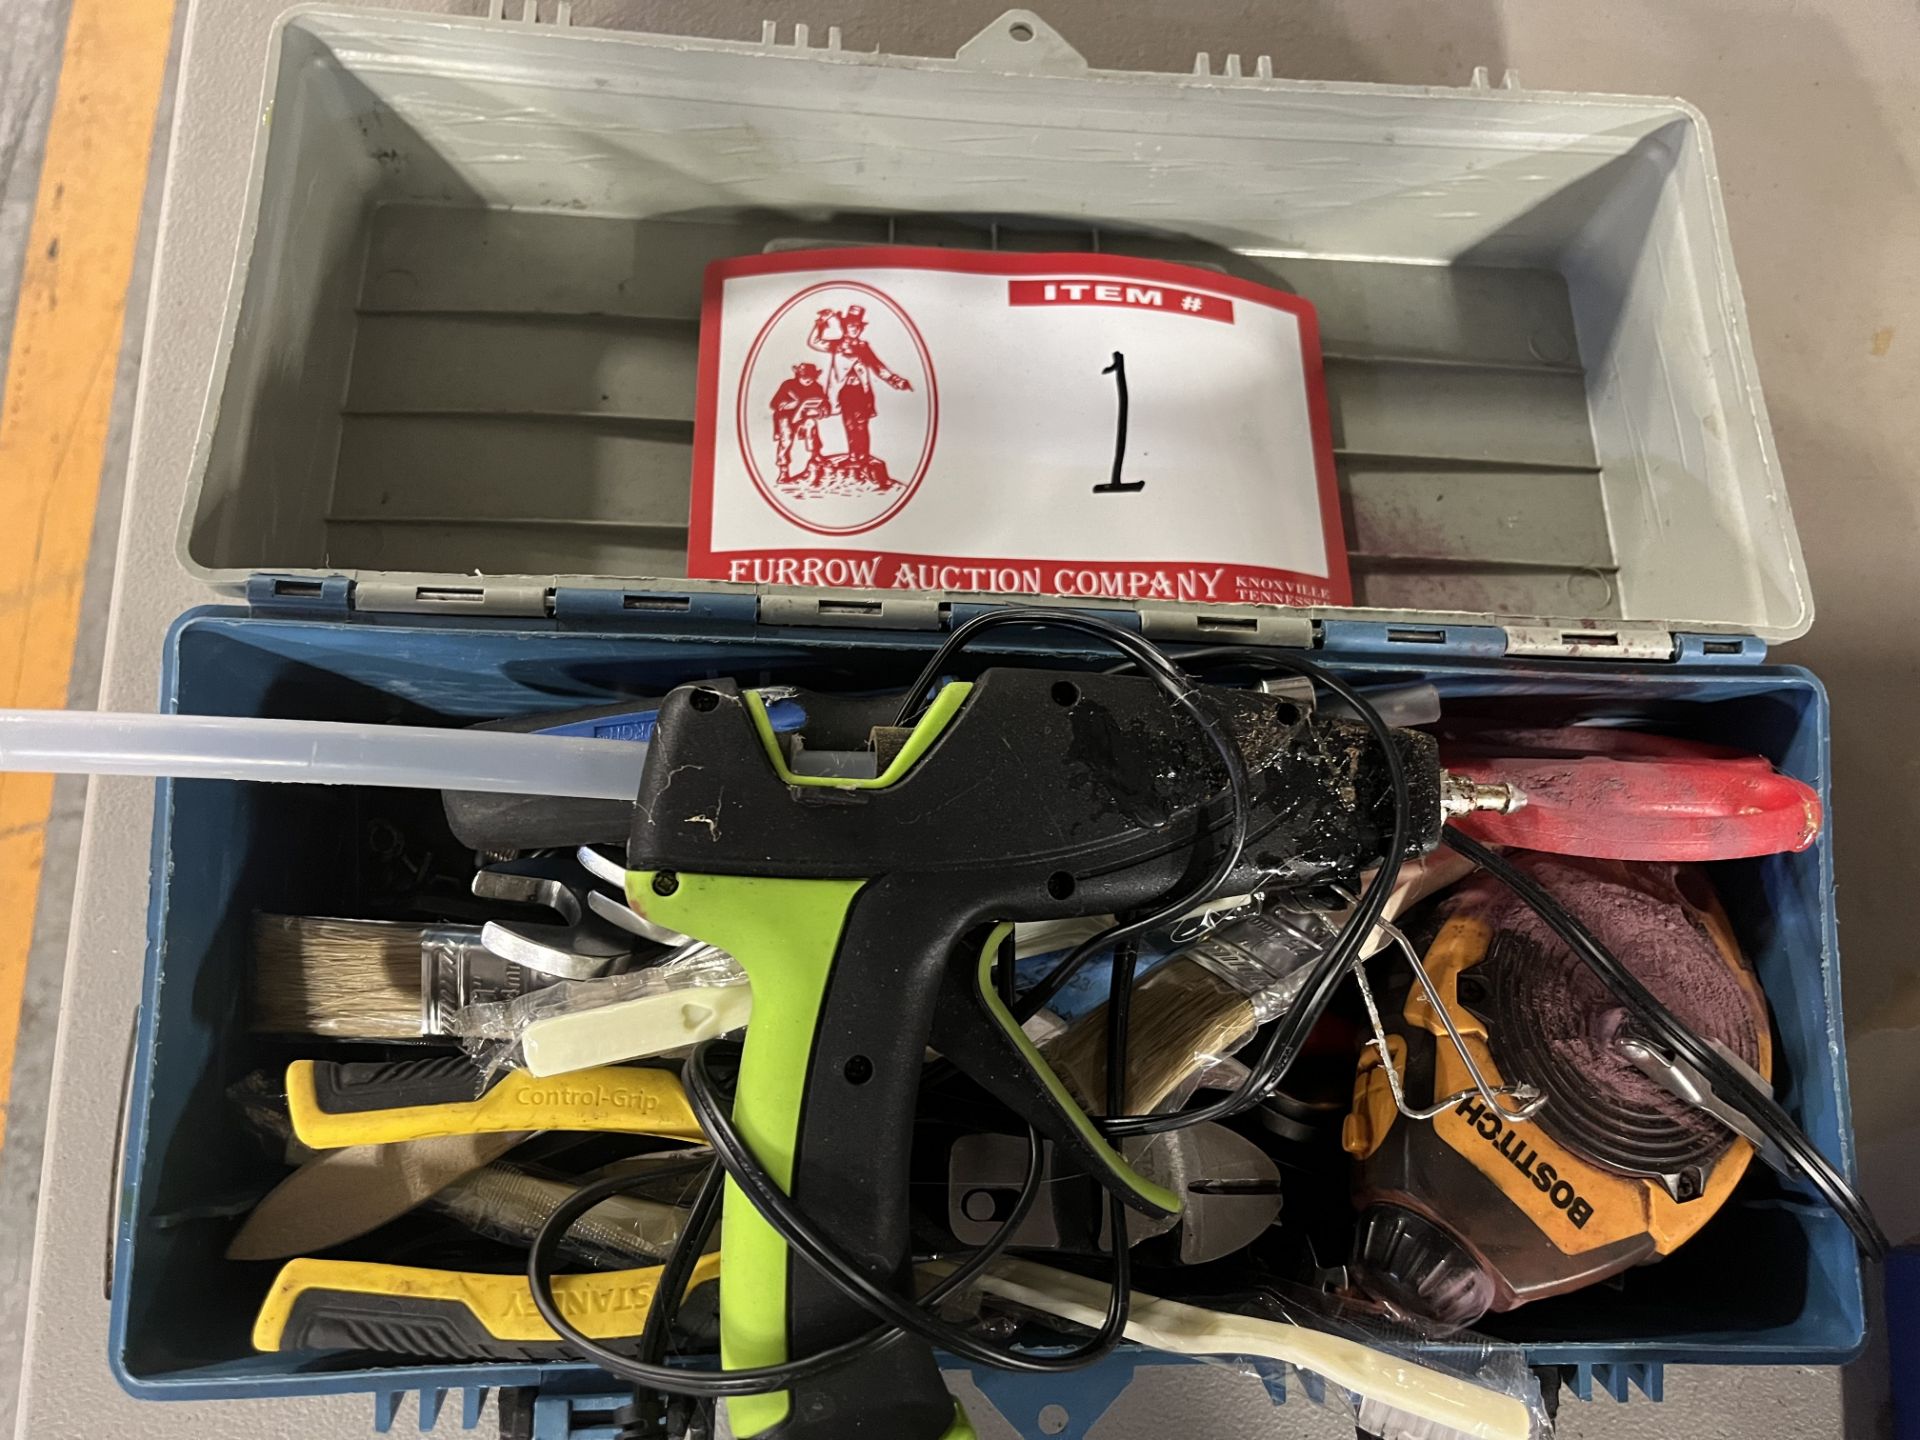 Tool box and Contents - glue guns, wire cutters, wrenches, etc. - Image 2 of 4